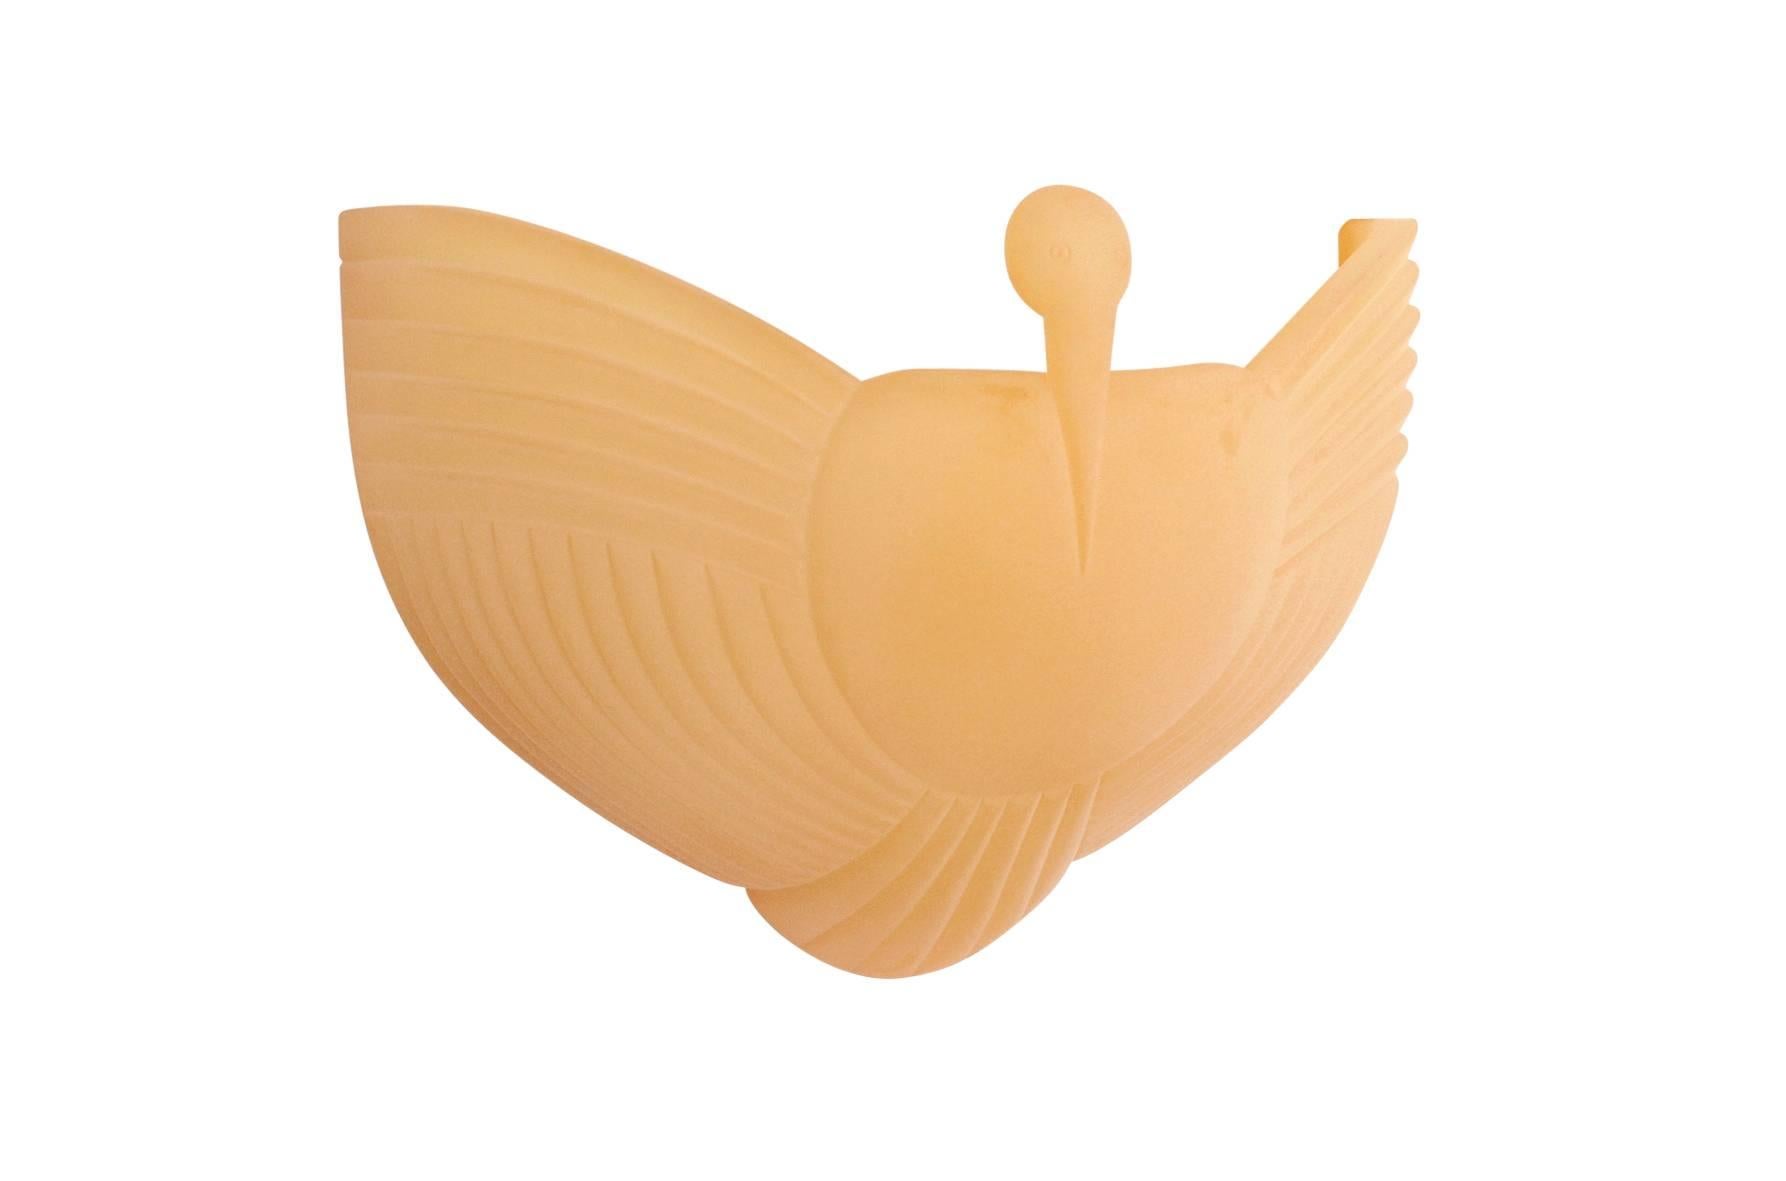 Cast resin wall-mounted sconce by Judy Kensley McKie in the form of a bird. This is from a limited edition of 32 sconces produced in 1997. Signed and numbered to reverse edge.